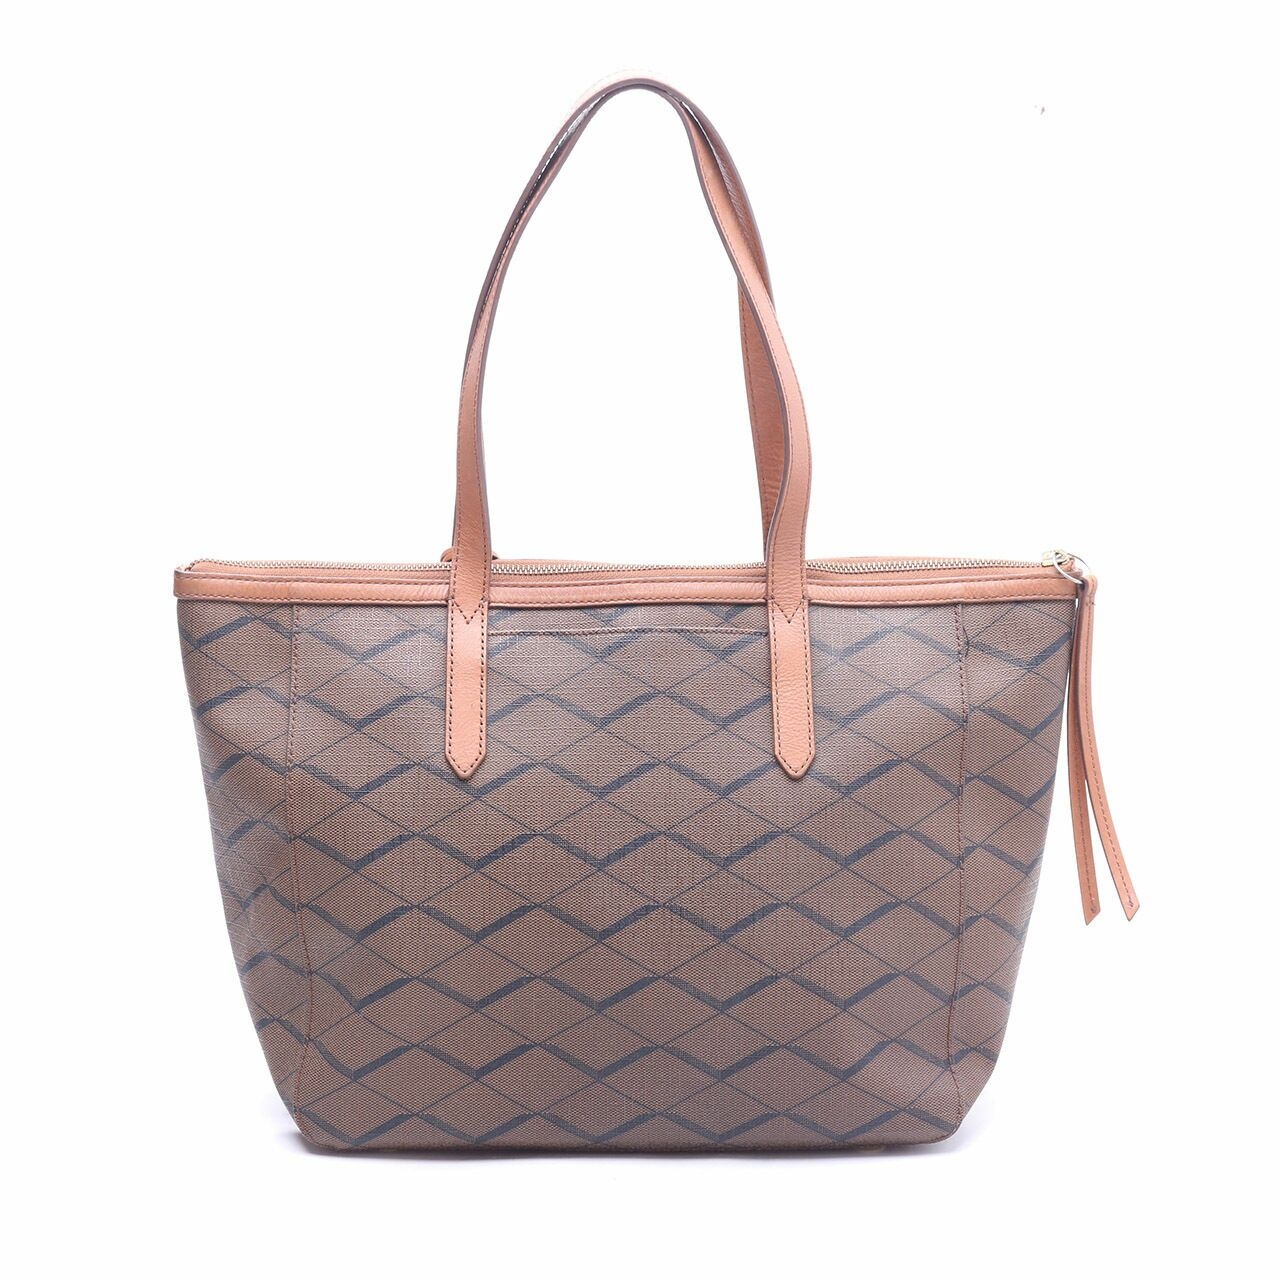 Fossil Accessories Sydney Brown Tote Bag